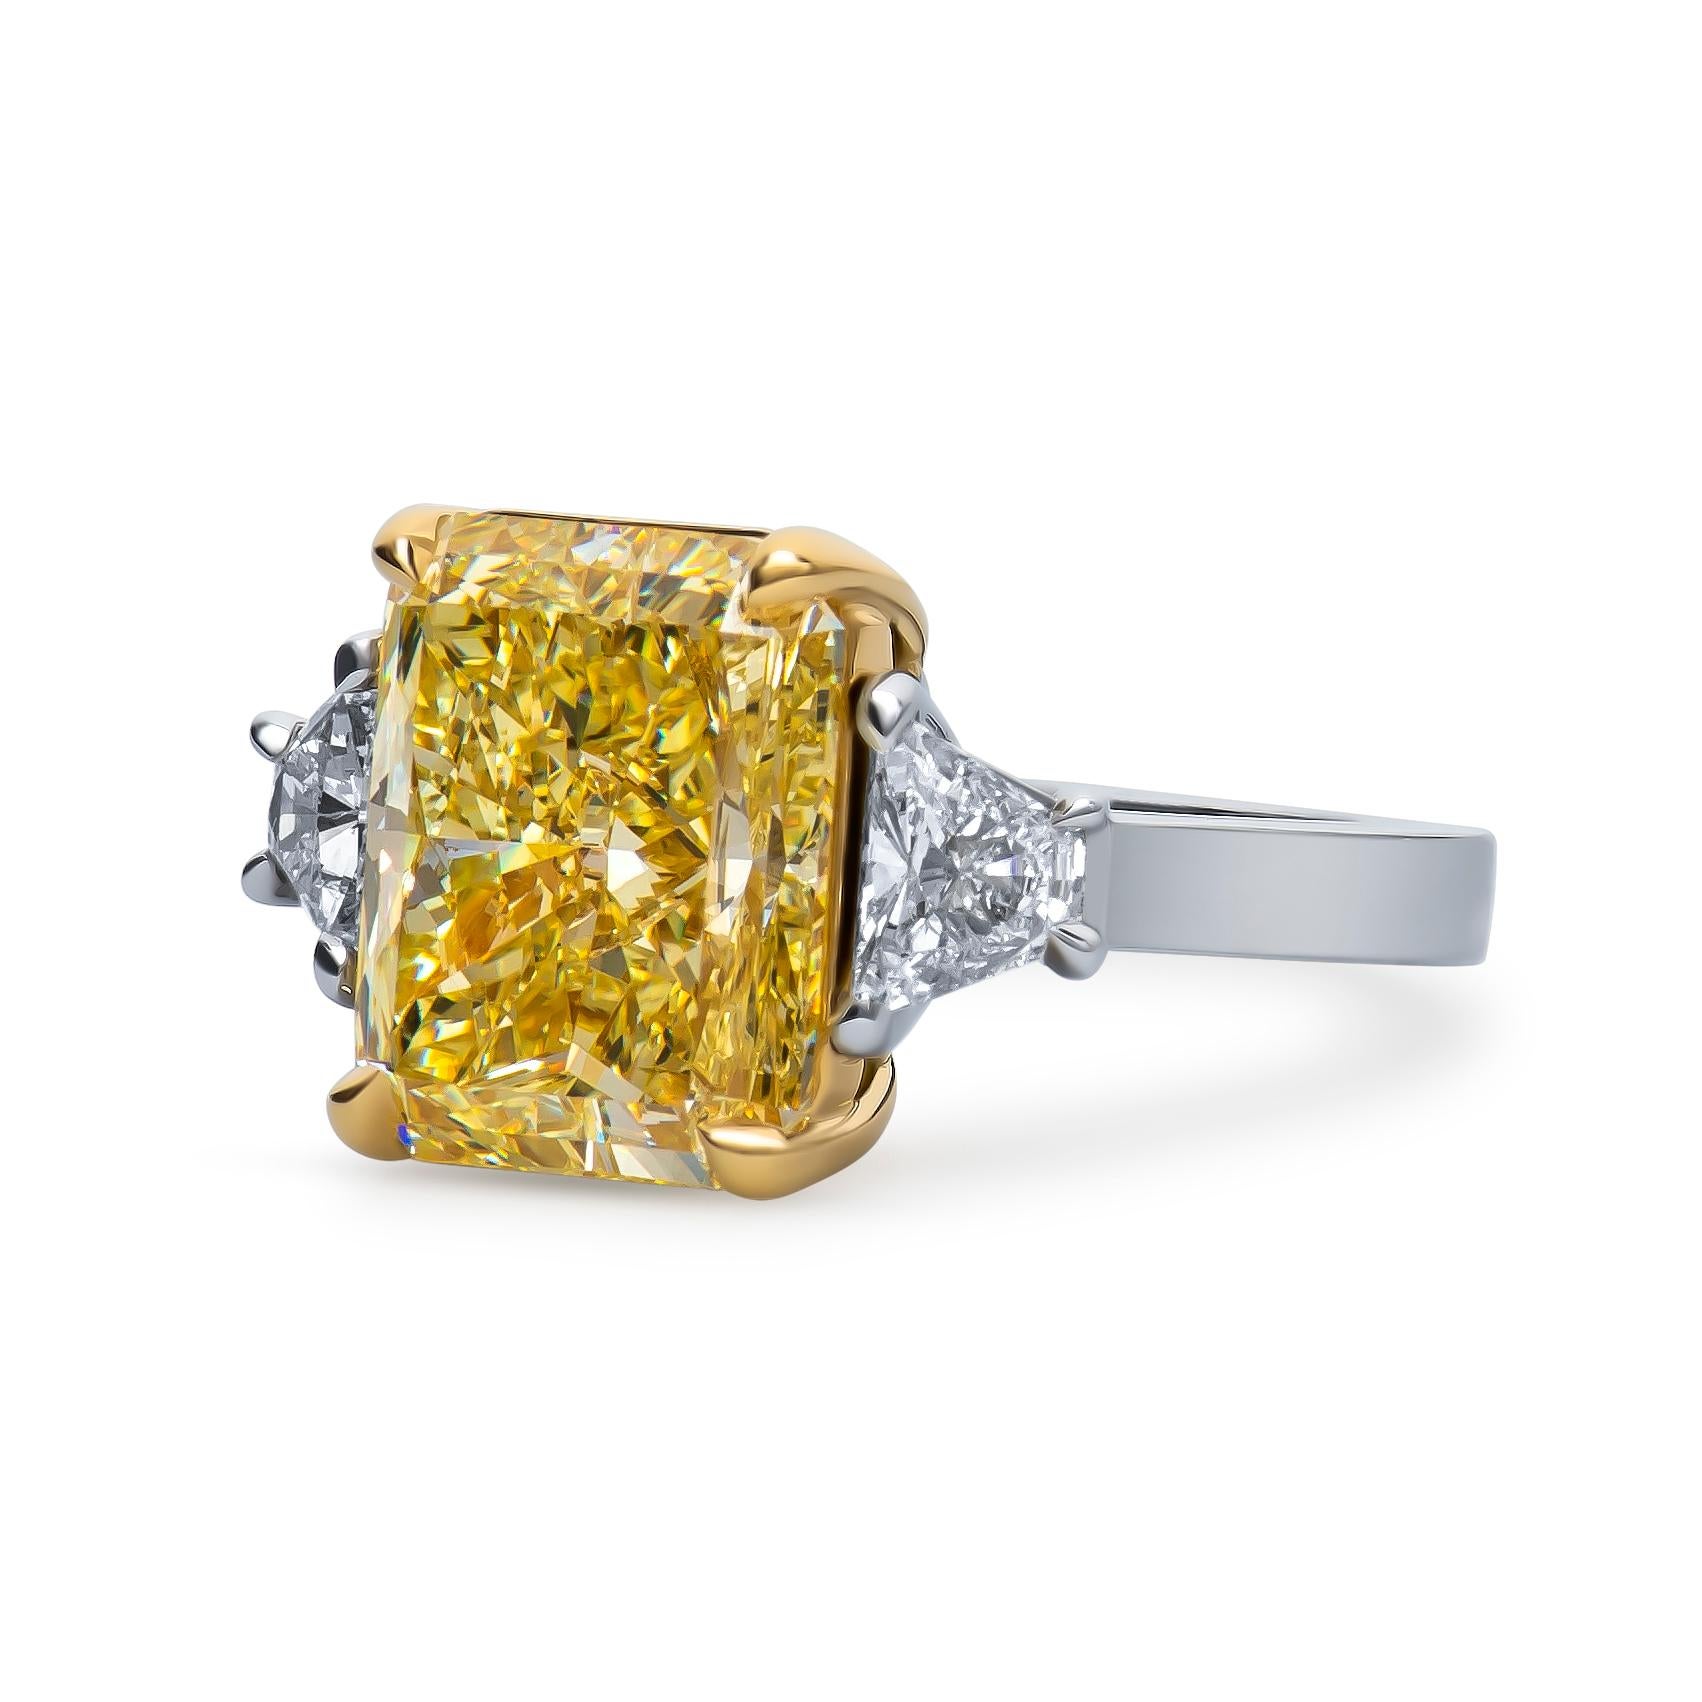 7.32 Carat natural fancy color radiant cut diamond, SI1 clarity (GIA report), set in a platinum ring with an 18k yellow gold center setting and 0.70 carats total weight in side trapezoid brilliant cut diamonds. Size 6.25, may be resized to larger or